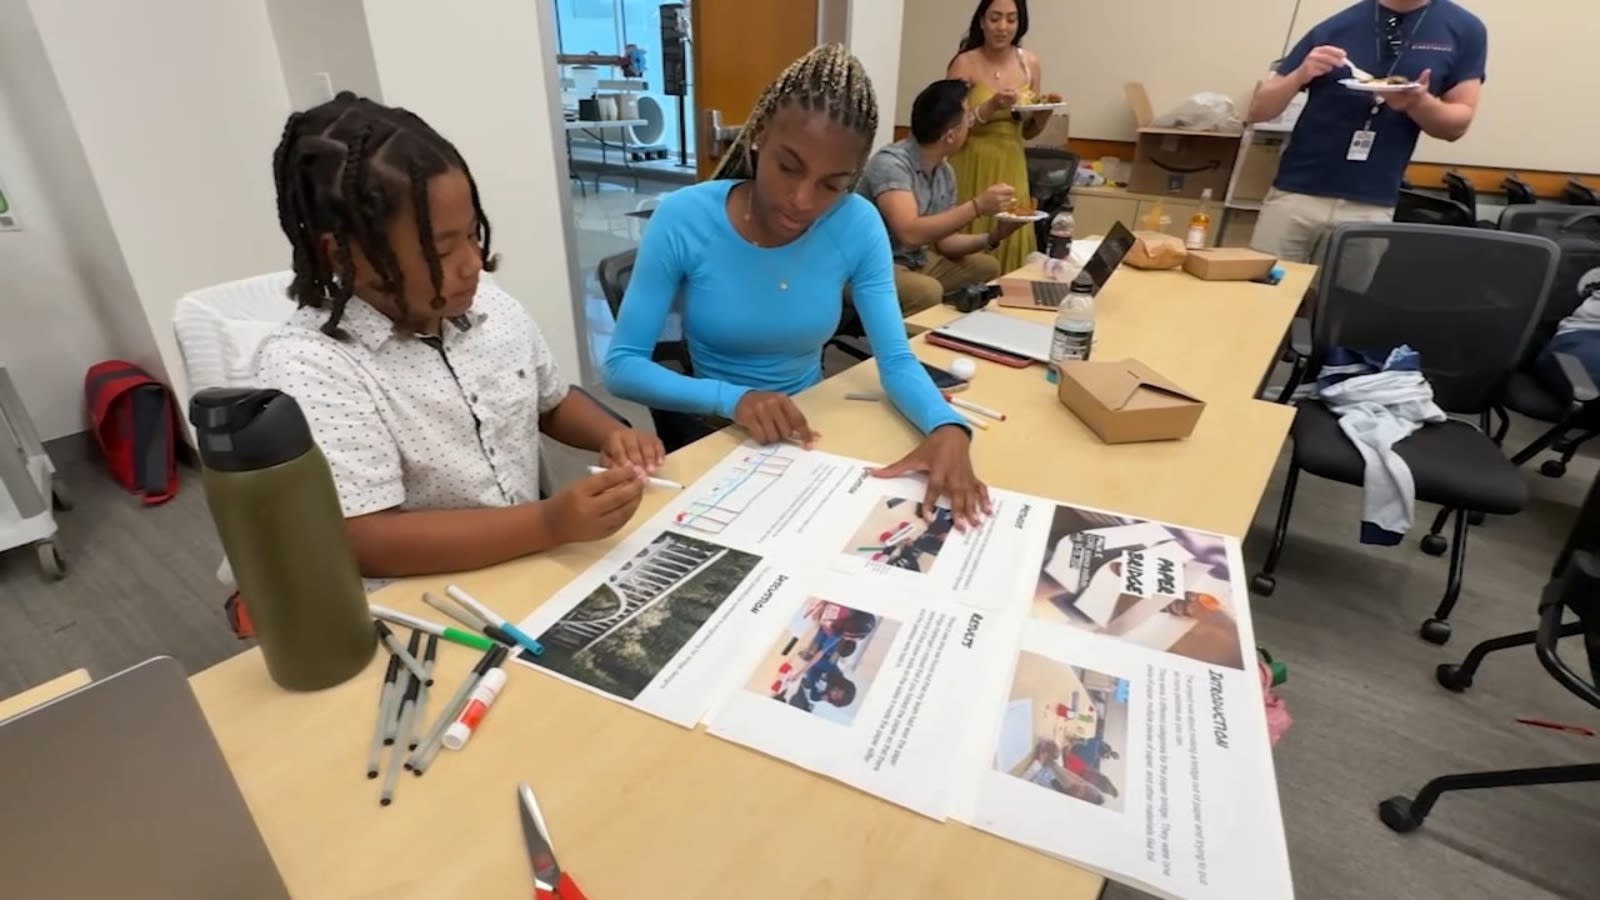 SLAC National Accelerator Laboratory hosts 21 Oakland middle schoolers for free 1-week camp